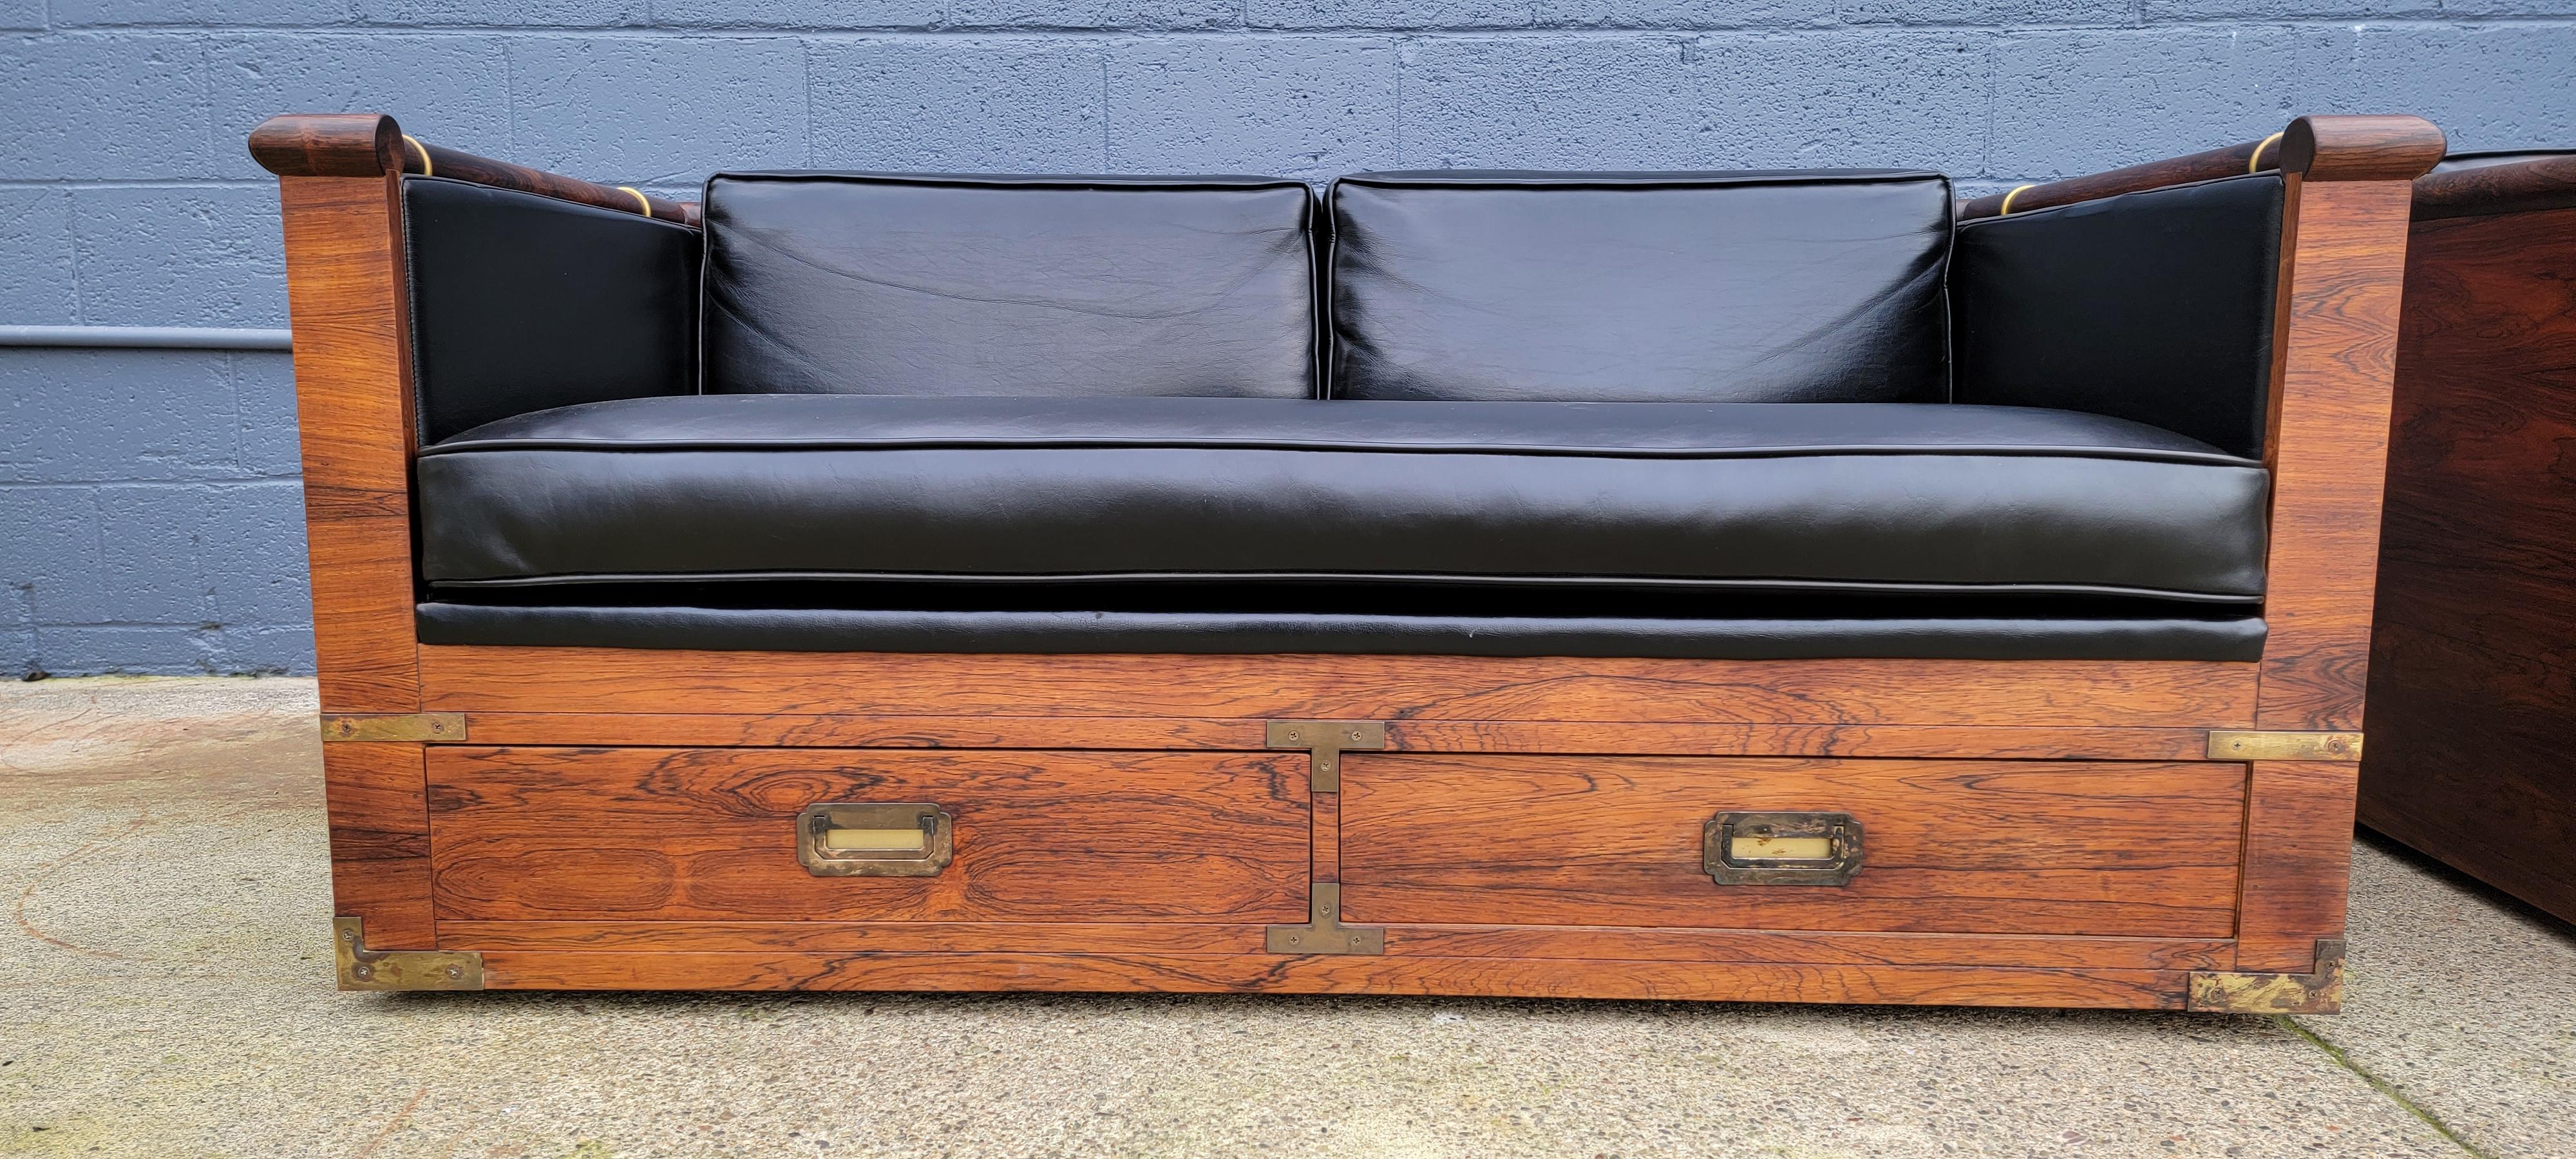 Exceptional matched pair of Campaign style rosewood sofas by Marge Carson. Deep, rich glow to original finish with beautifully figured wood grain. Brass mounts and handles. Each sofa features two drawers for storage and castors for easier moving.